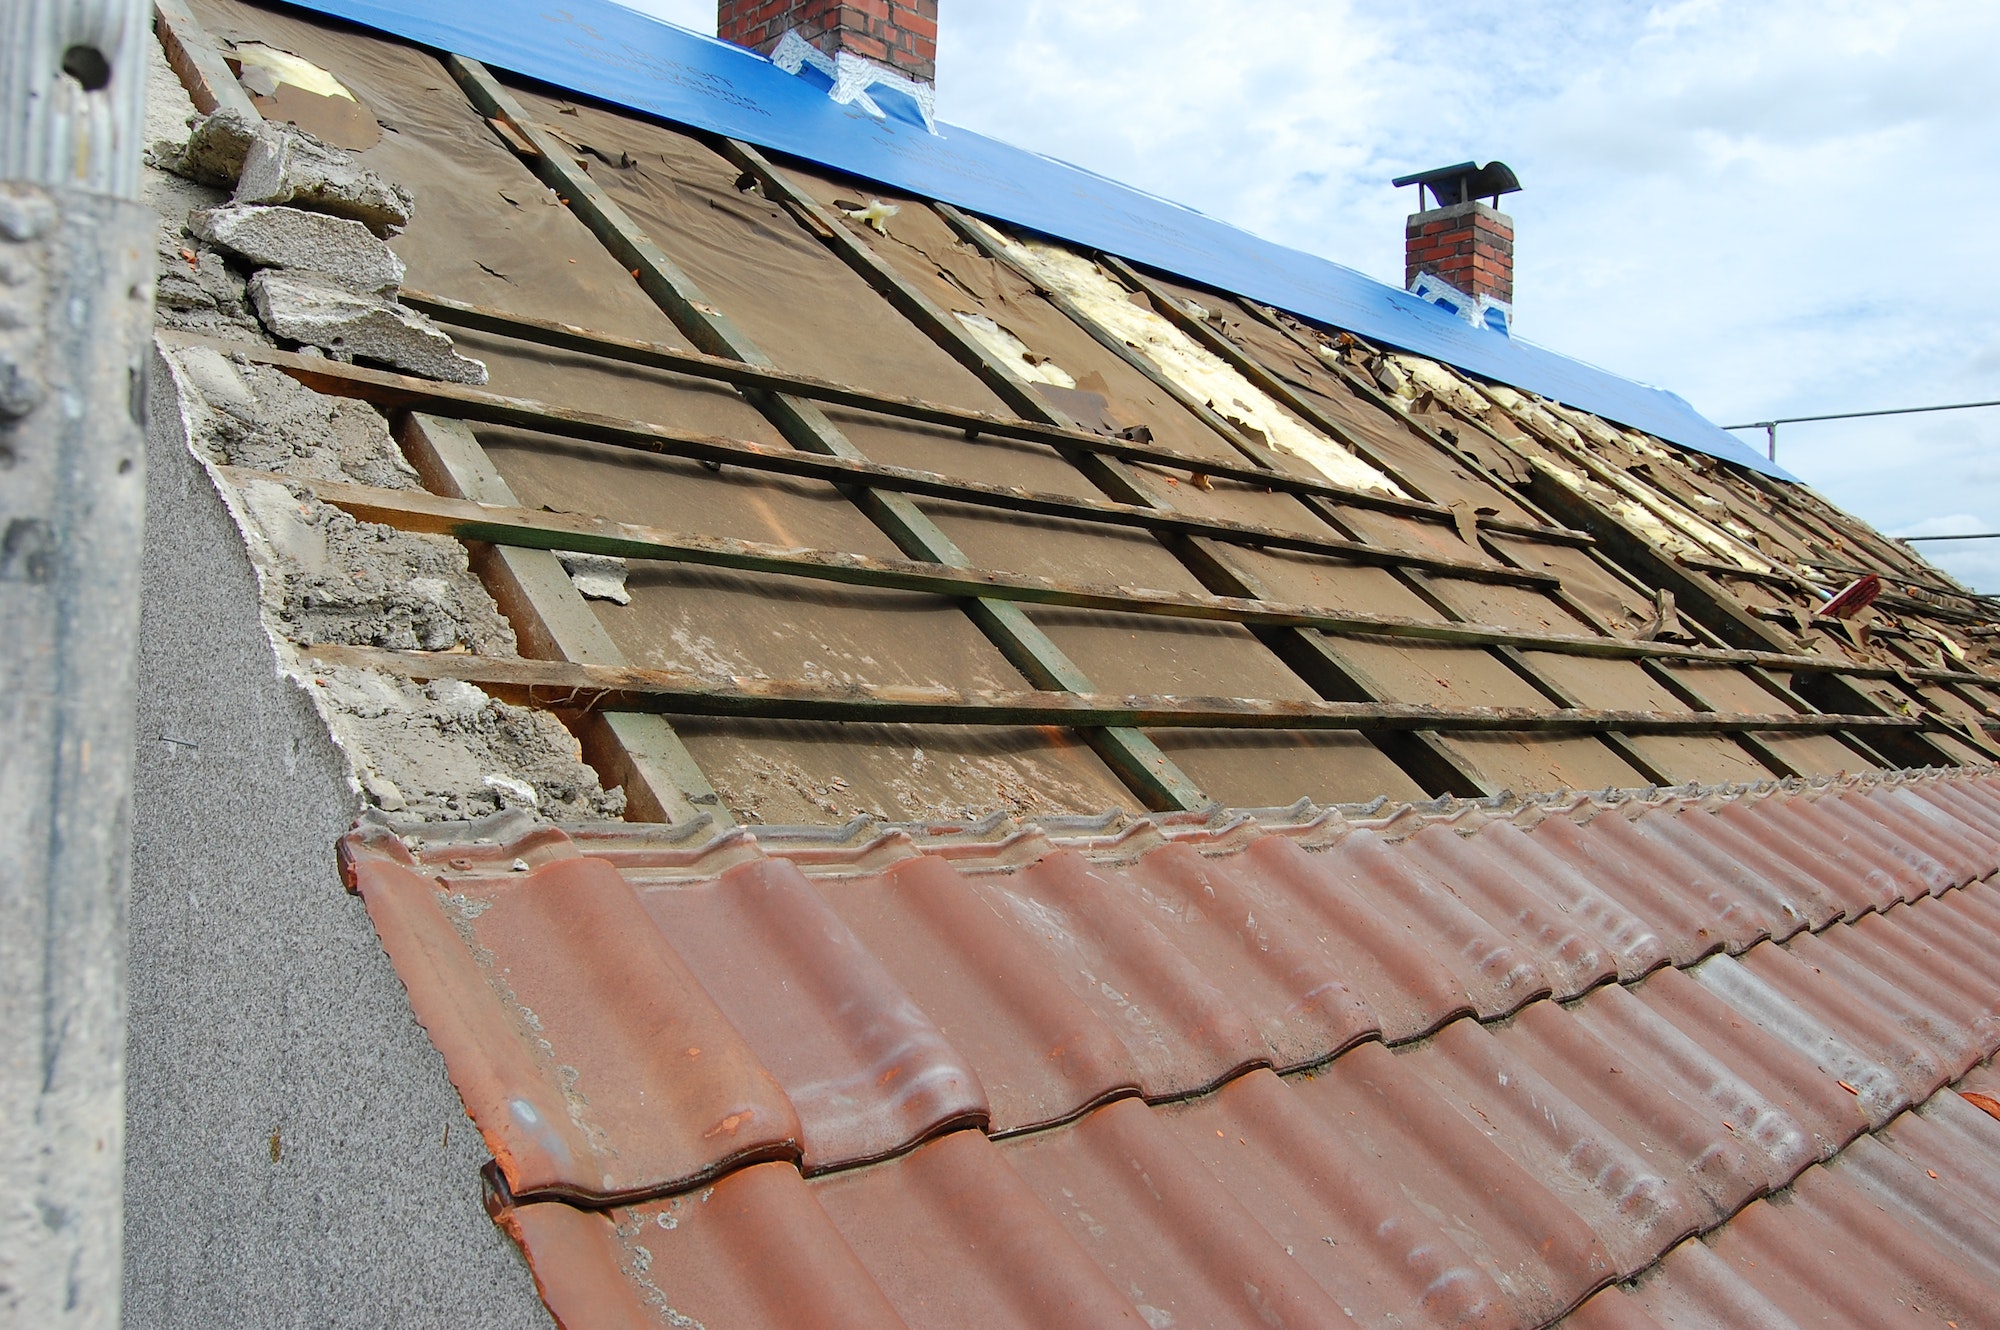 Work on a roof. Partly removed roof tiles and still old insulation.